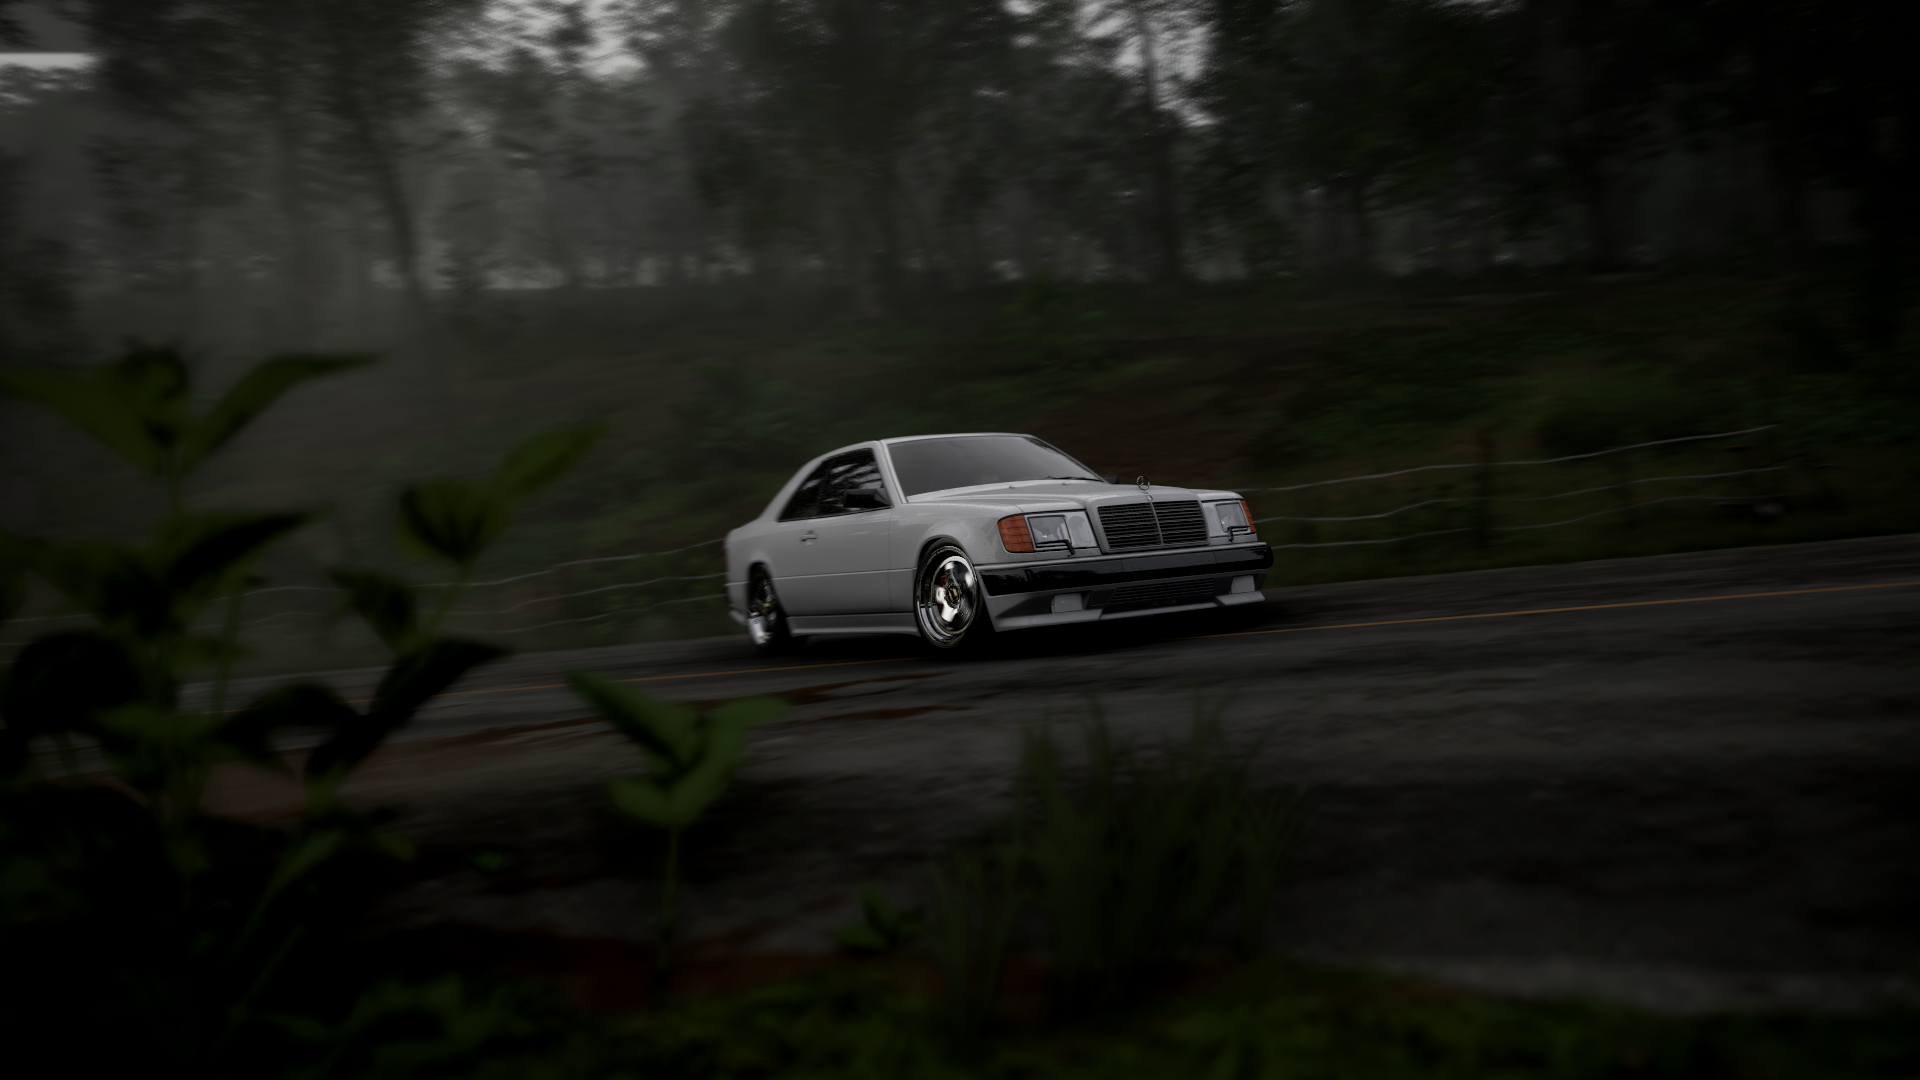 General 1920x1080 Forza Horizon 5 PlaygroundGames CGI video games vehicle trees Mercedes-Benz German cars forest video game art screen shot frontal view road car driving leaves